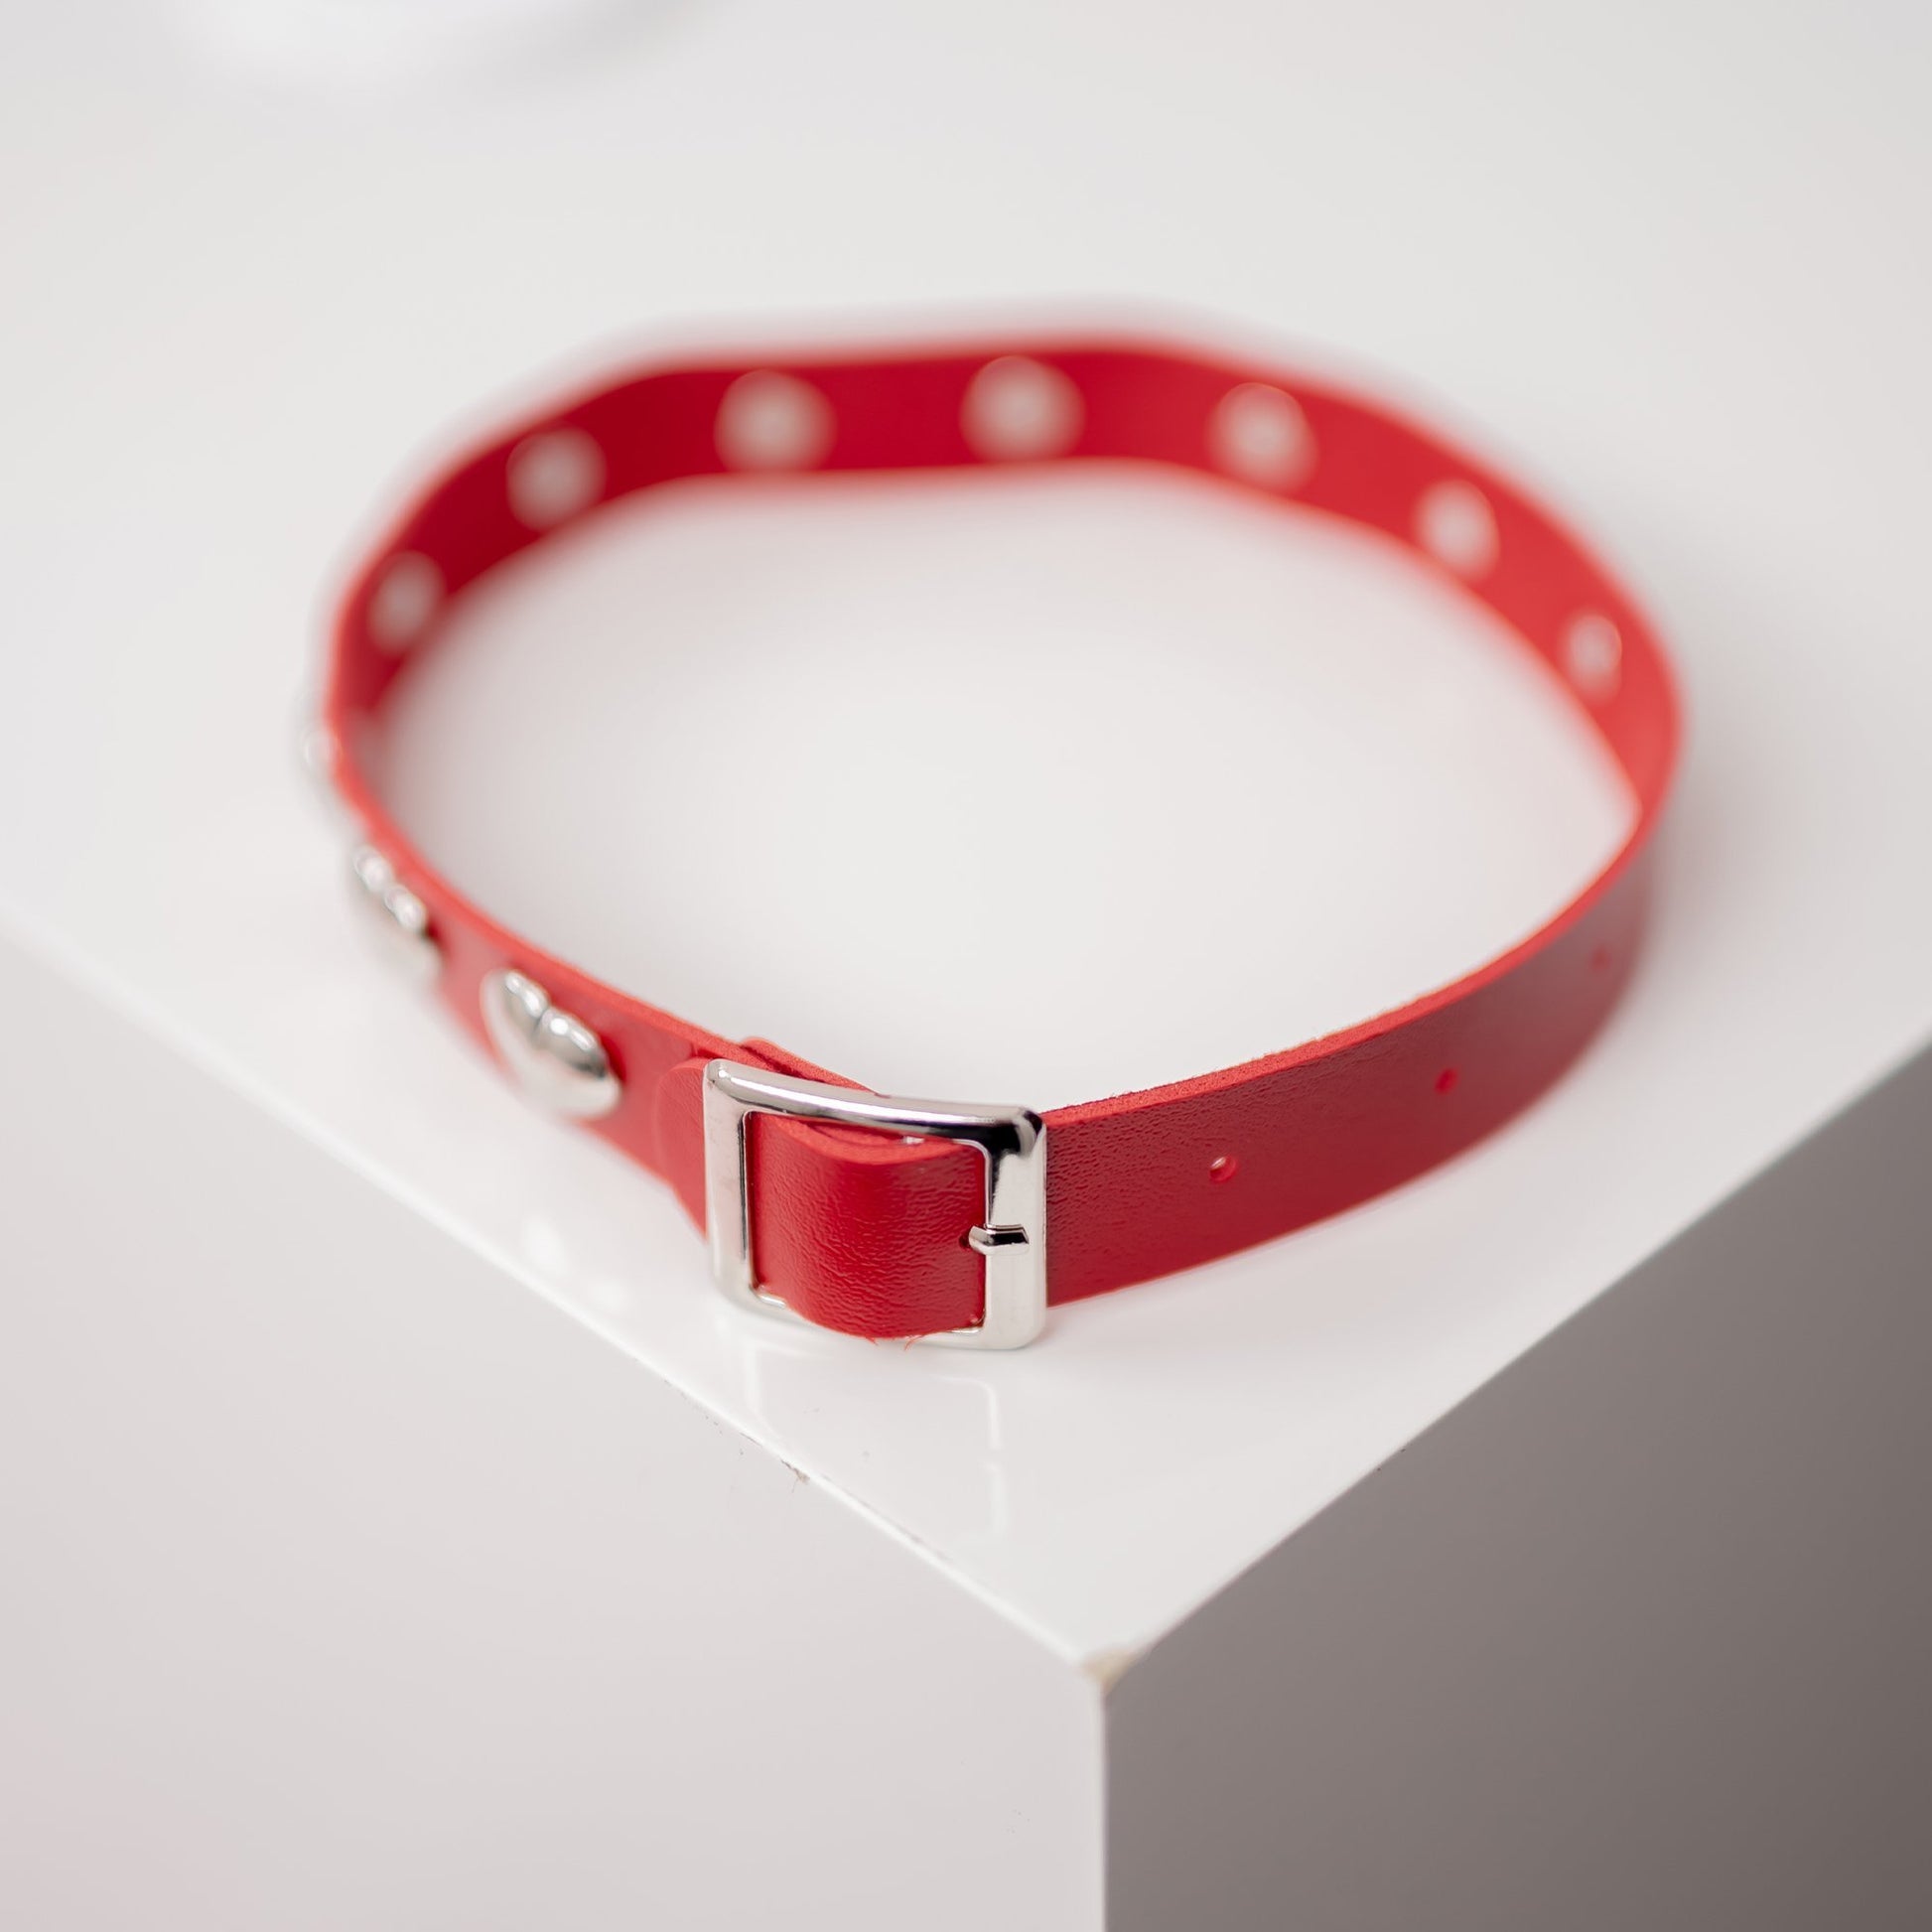 Red Heart-Shaped Choker Necklace by Lewd Fashion